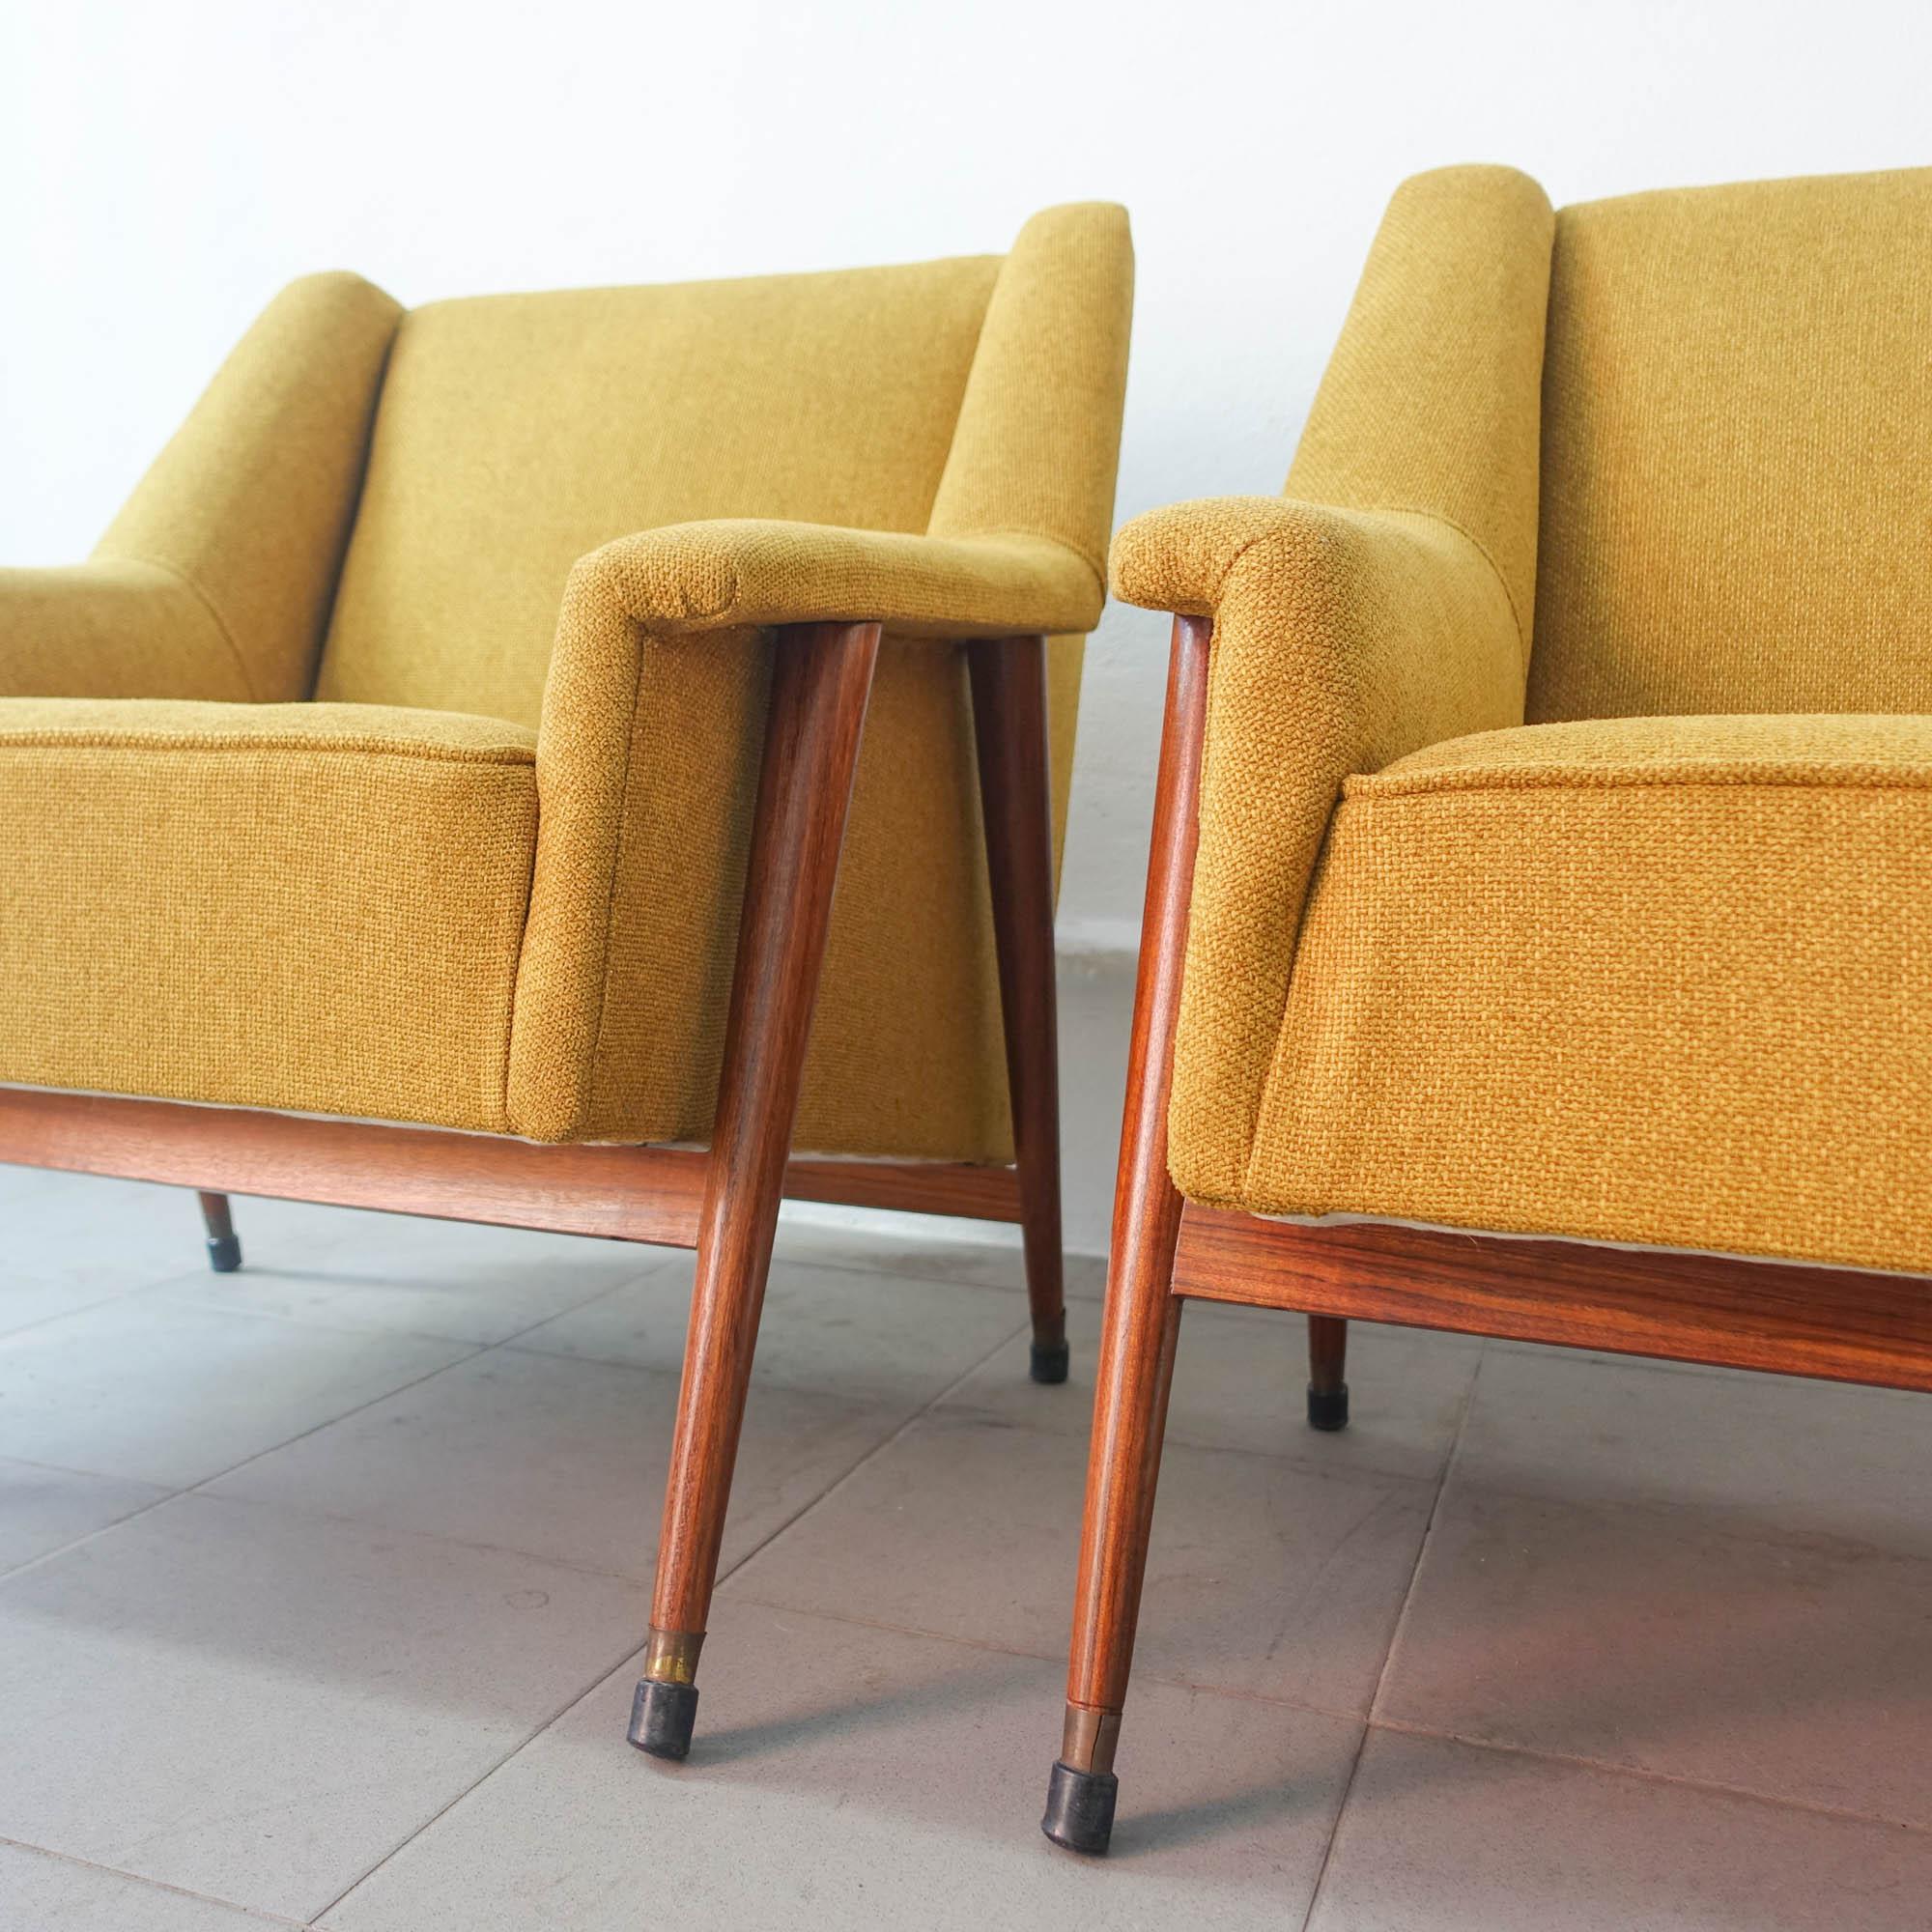 Pair of Easy Chairs, by José Espinho for Olaio, 1959 For Sale 9